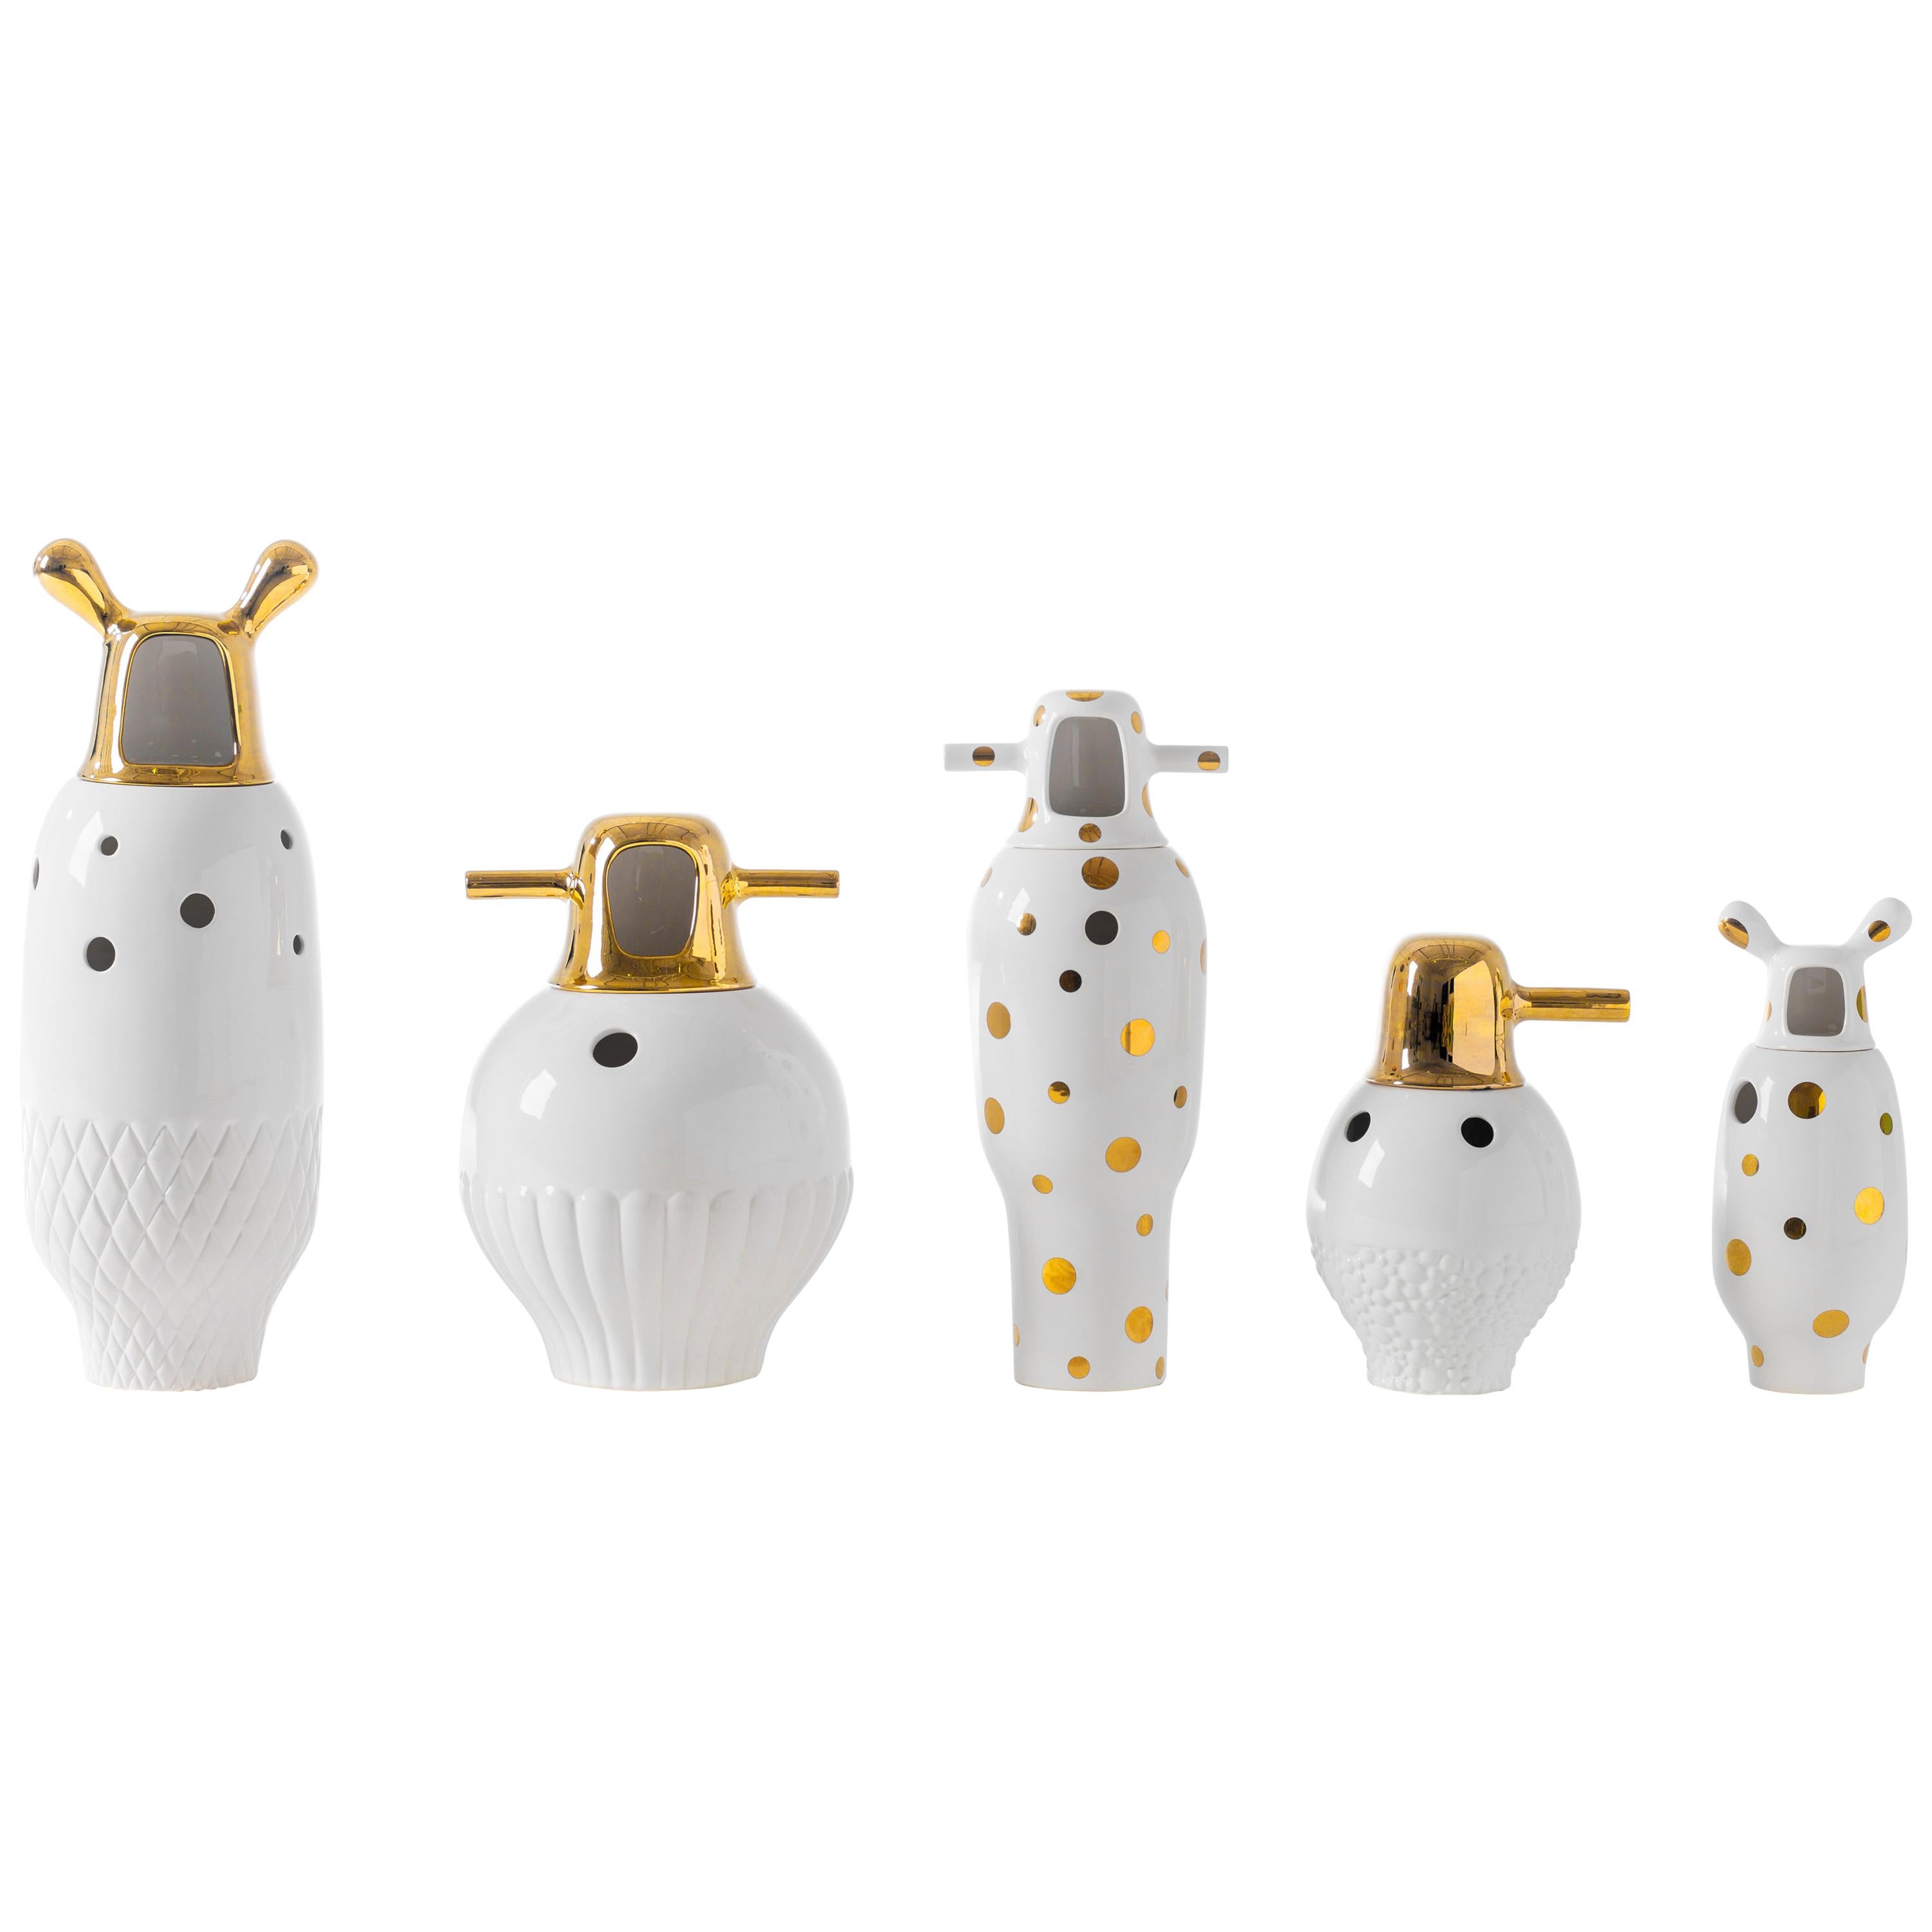 Contemporary showtime 10 vases by Jaime Hayon.
Manufactured by BD Barcelona (Spain).

Made up of two pieces in glazed stoneware, with a white finish and 24-carat gold-plated decorations.

Measures: 
Vase N1: H 33 cm x Dm 19 cm.
Vase N2: H 34